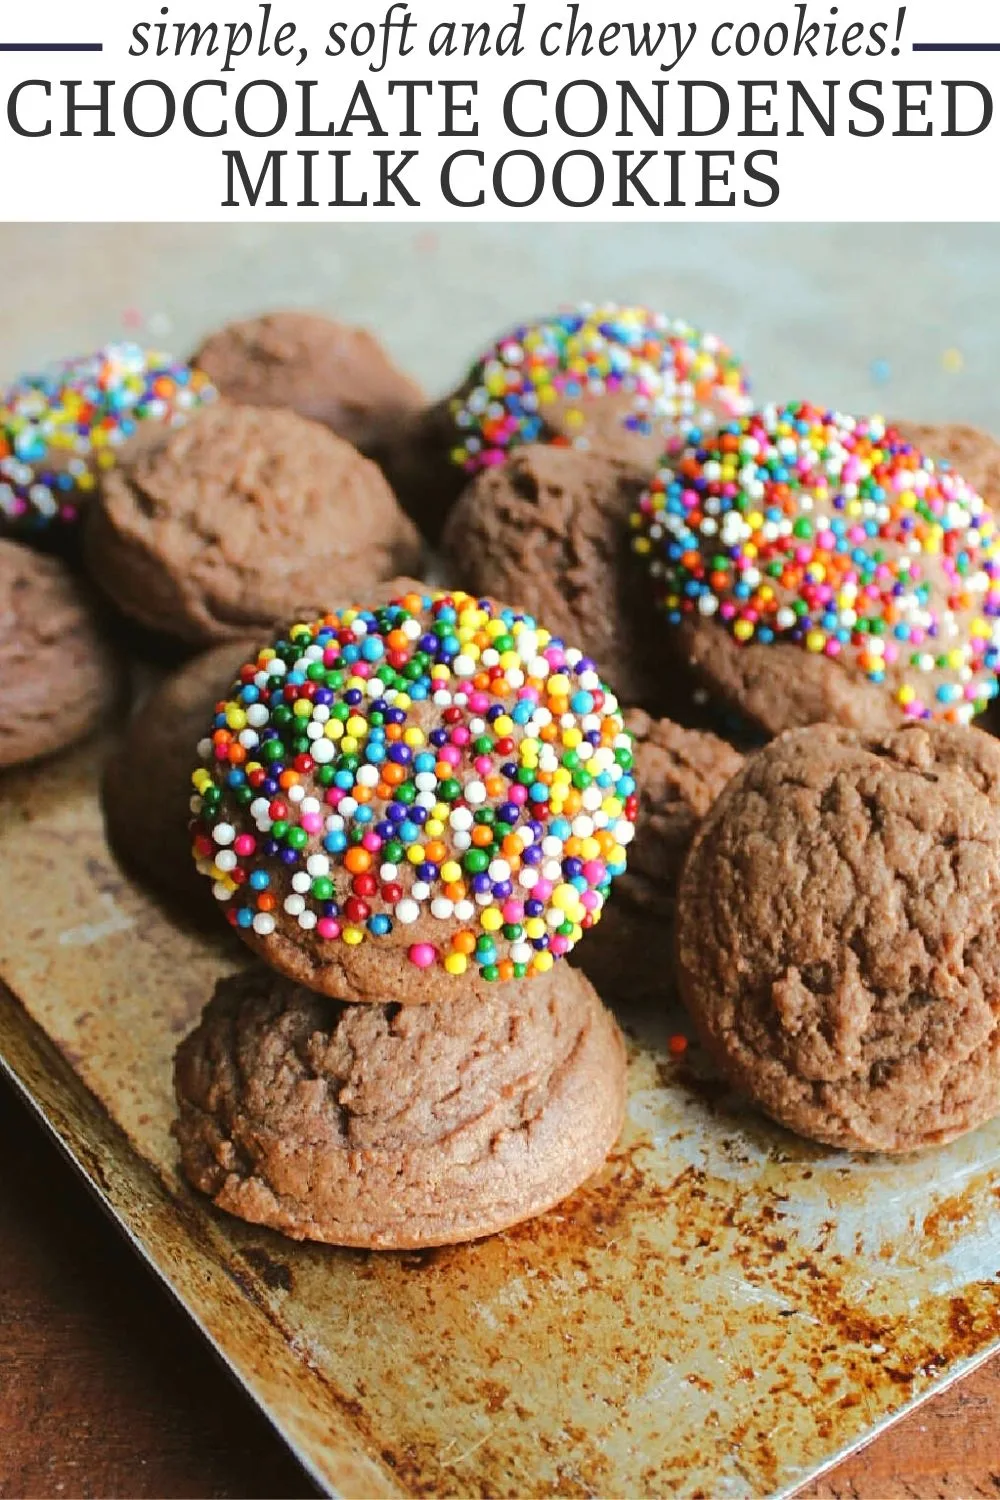 This chocolate condensed milk cookies recipe uses basic ingredients to make the best chewy cookies. The simple flavor and ingredient list is sure to win you over.